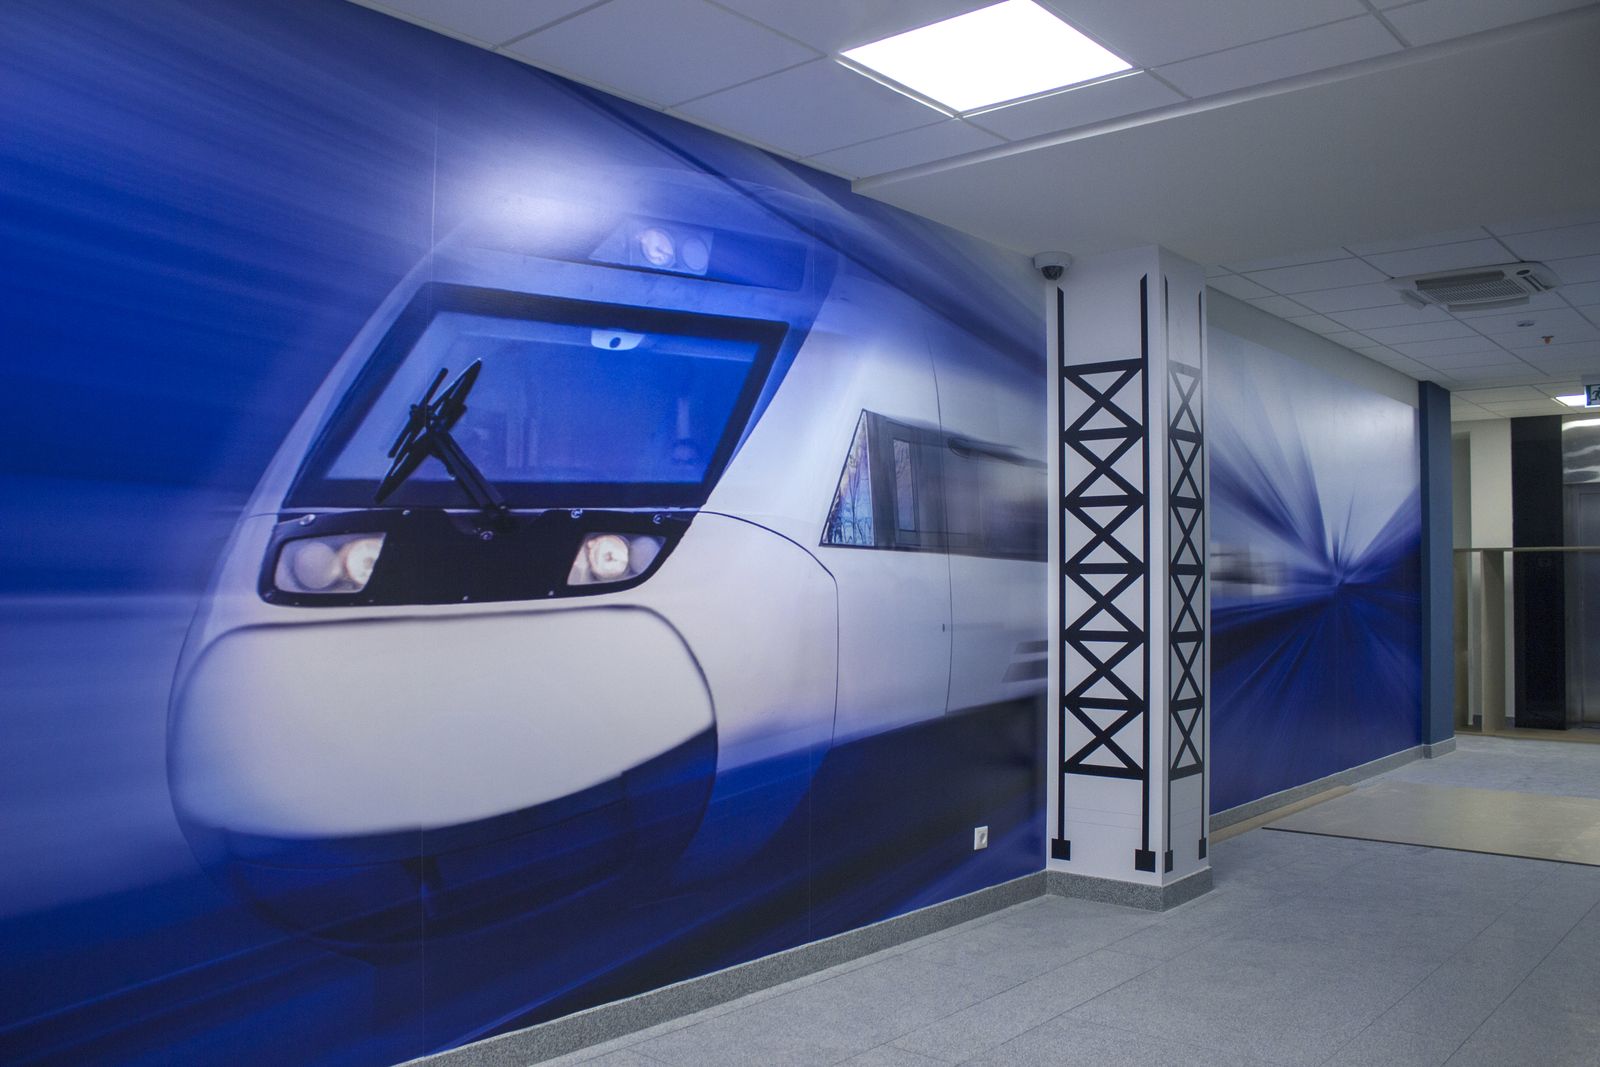 Ameriabank custom interior wall sign displaying an image of a train made of opaque vinyl